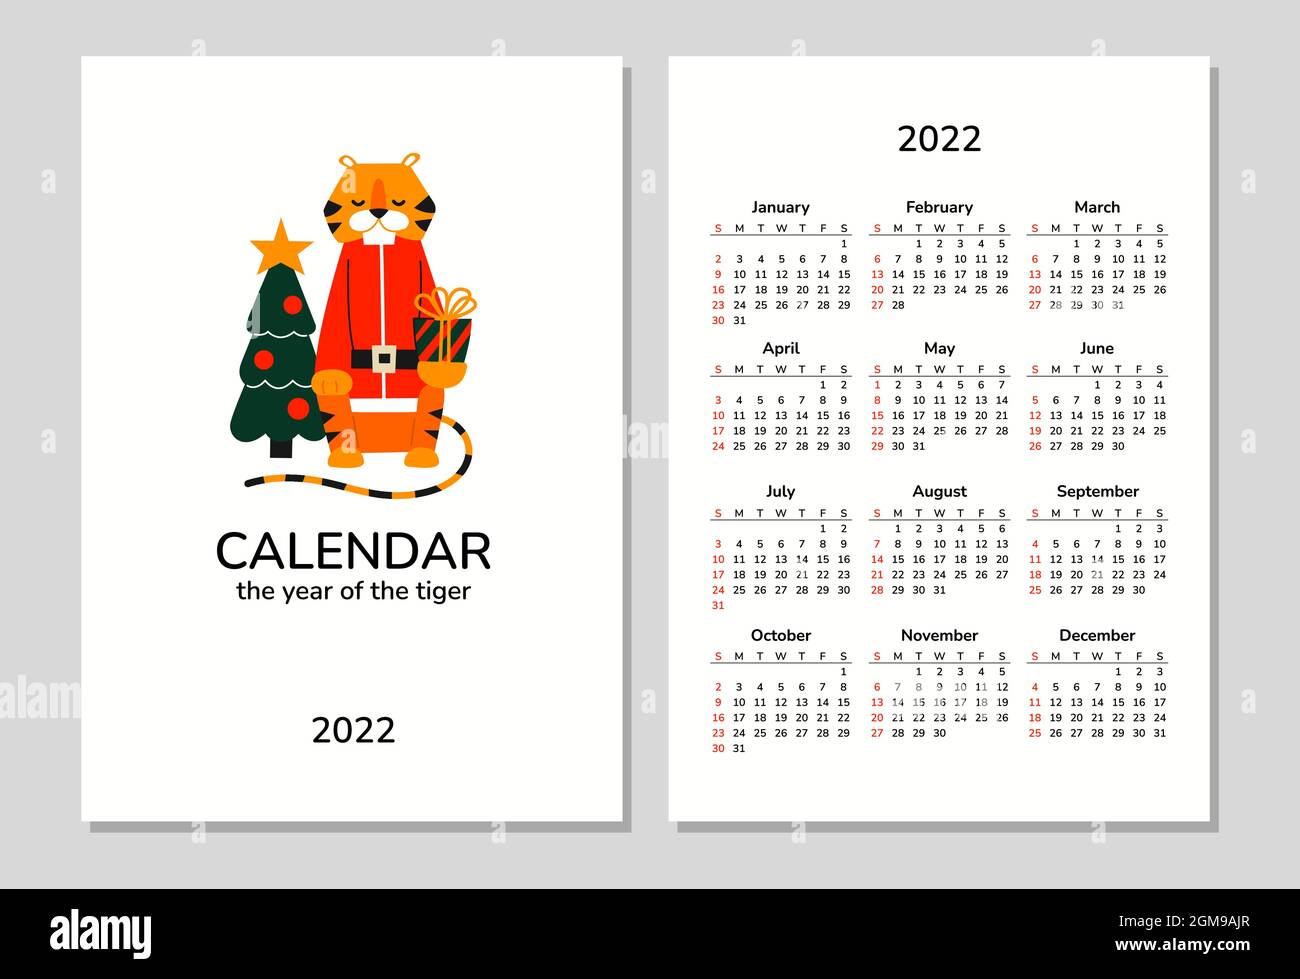 Christmas 2022 Calendar Calendar For 2022 With A Cute Tiger. Merry Christmas And Happy New Year.  Vector Isolated Illustration Of Tiger With Christmas Tree And Presents.  Santa Stock Vector Image & Art - Alamy